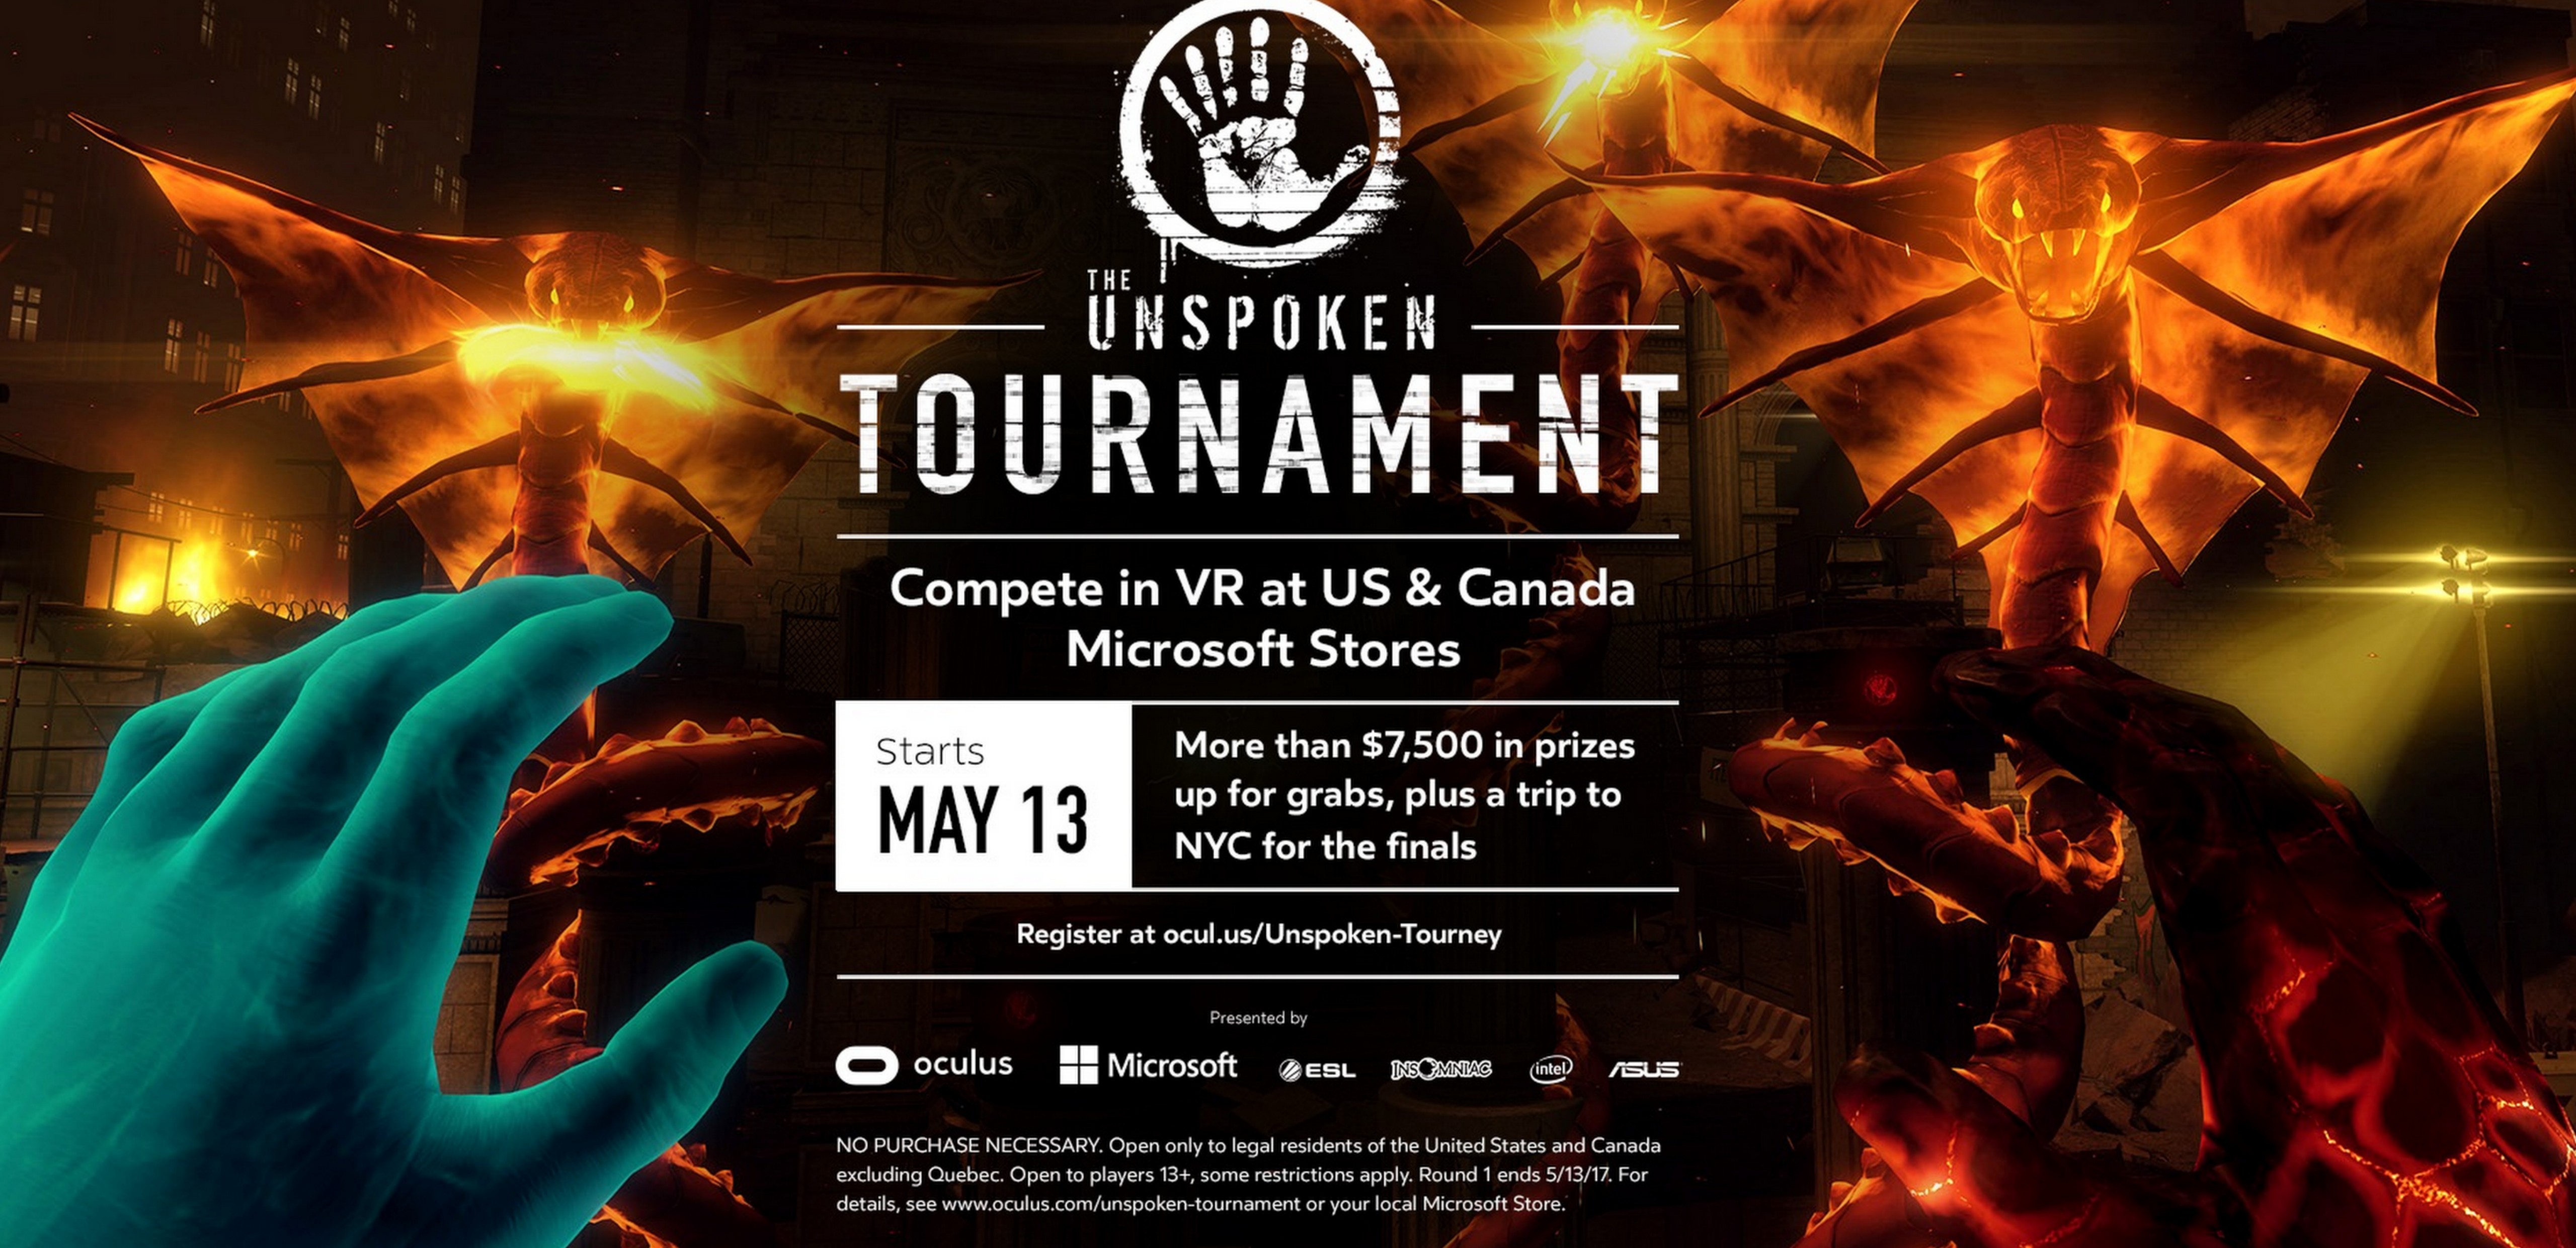 The Unspoken VR Tournament is Microsoft Store! | Experience